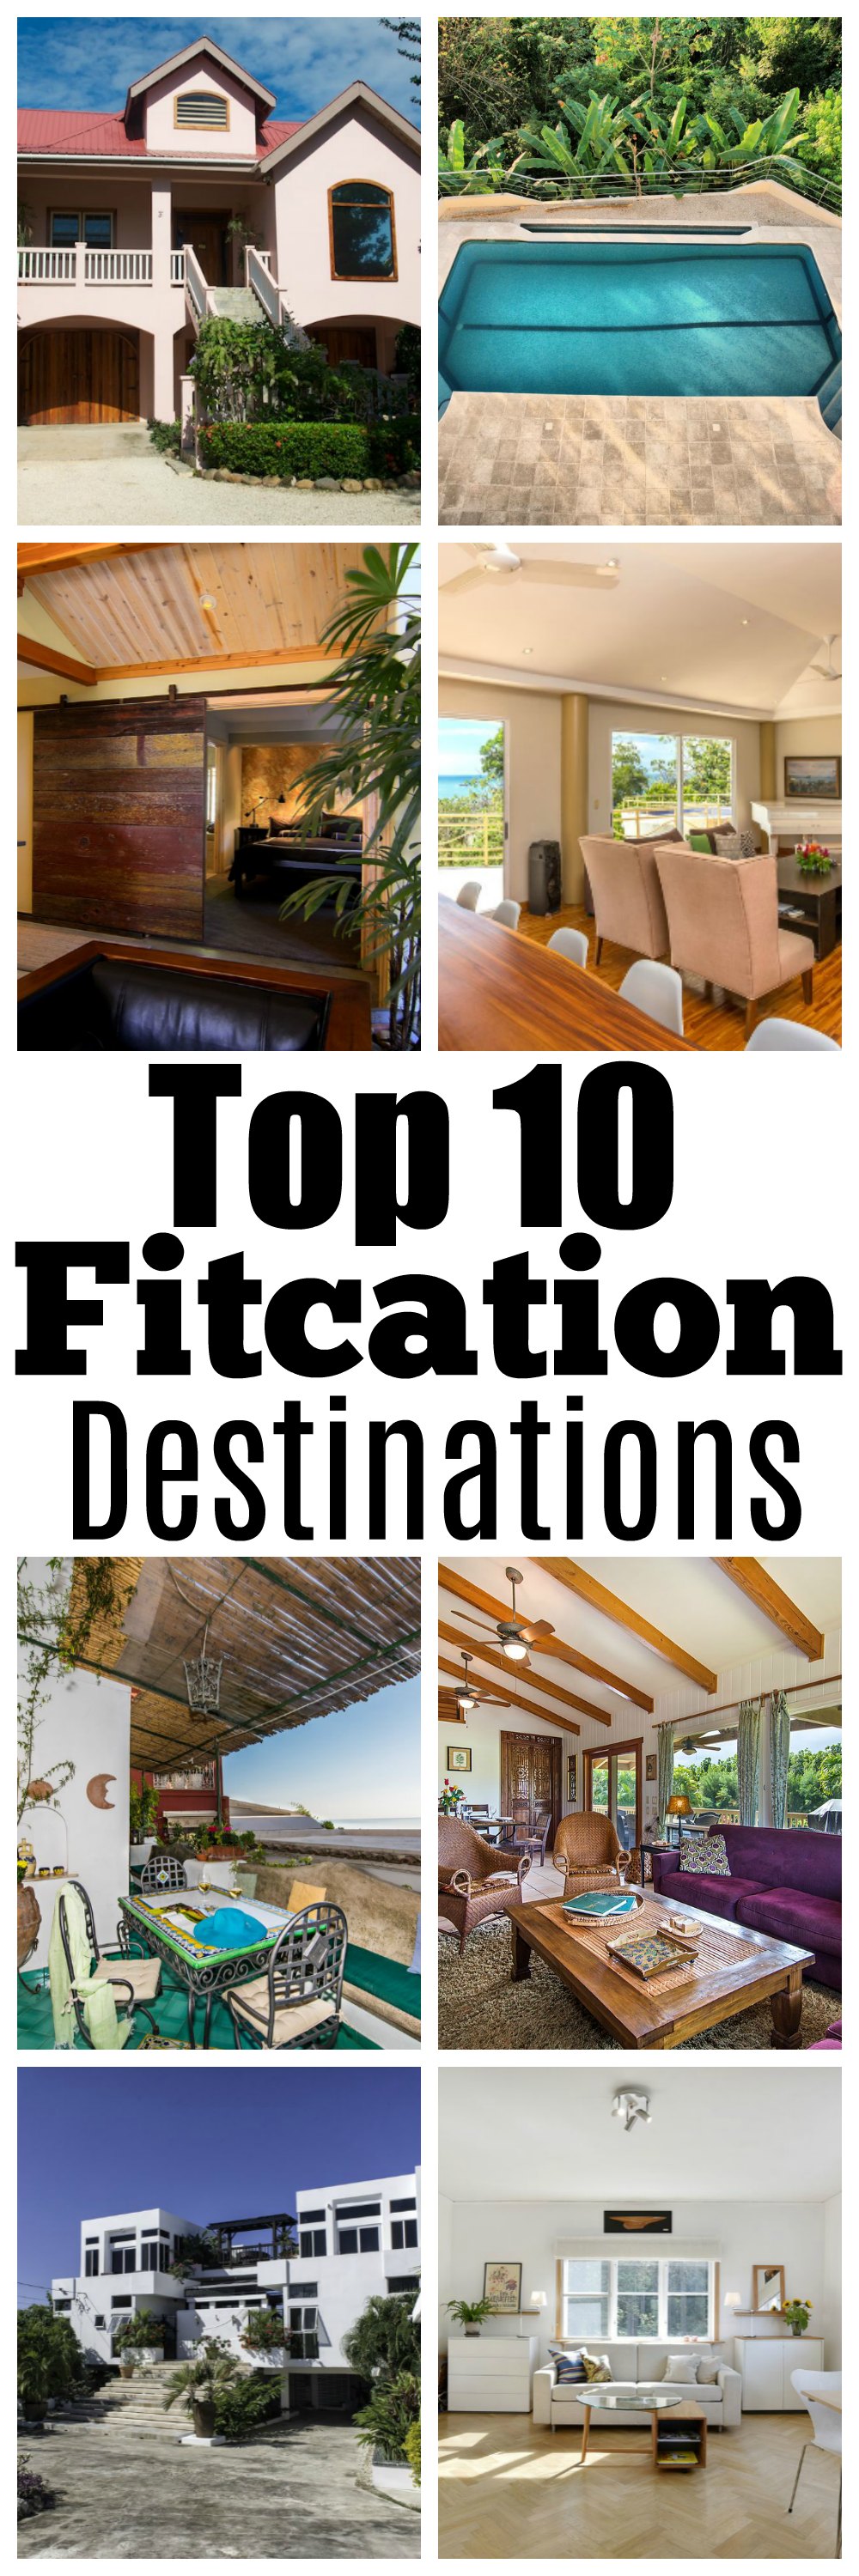 top 10 fitcation destinations - Top 10 Fitness Vacation Destinations with HomeAway by Atlanta fitness blogger Happily Hughes